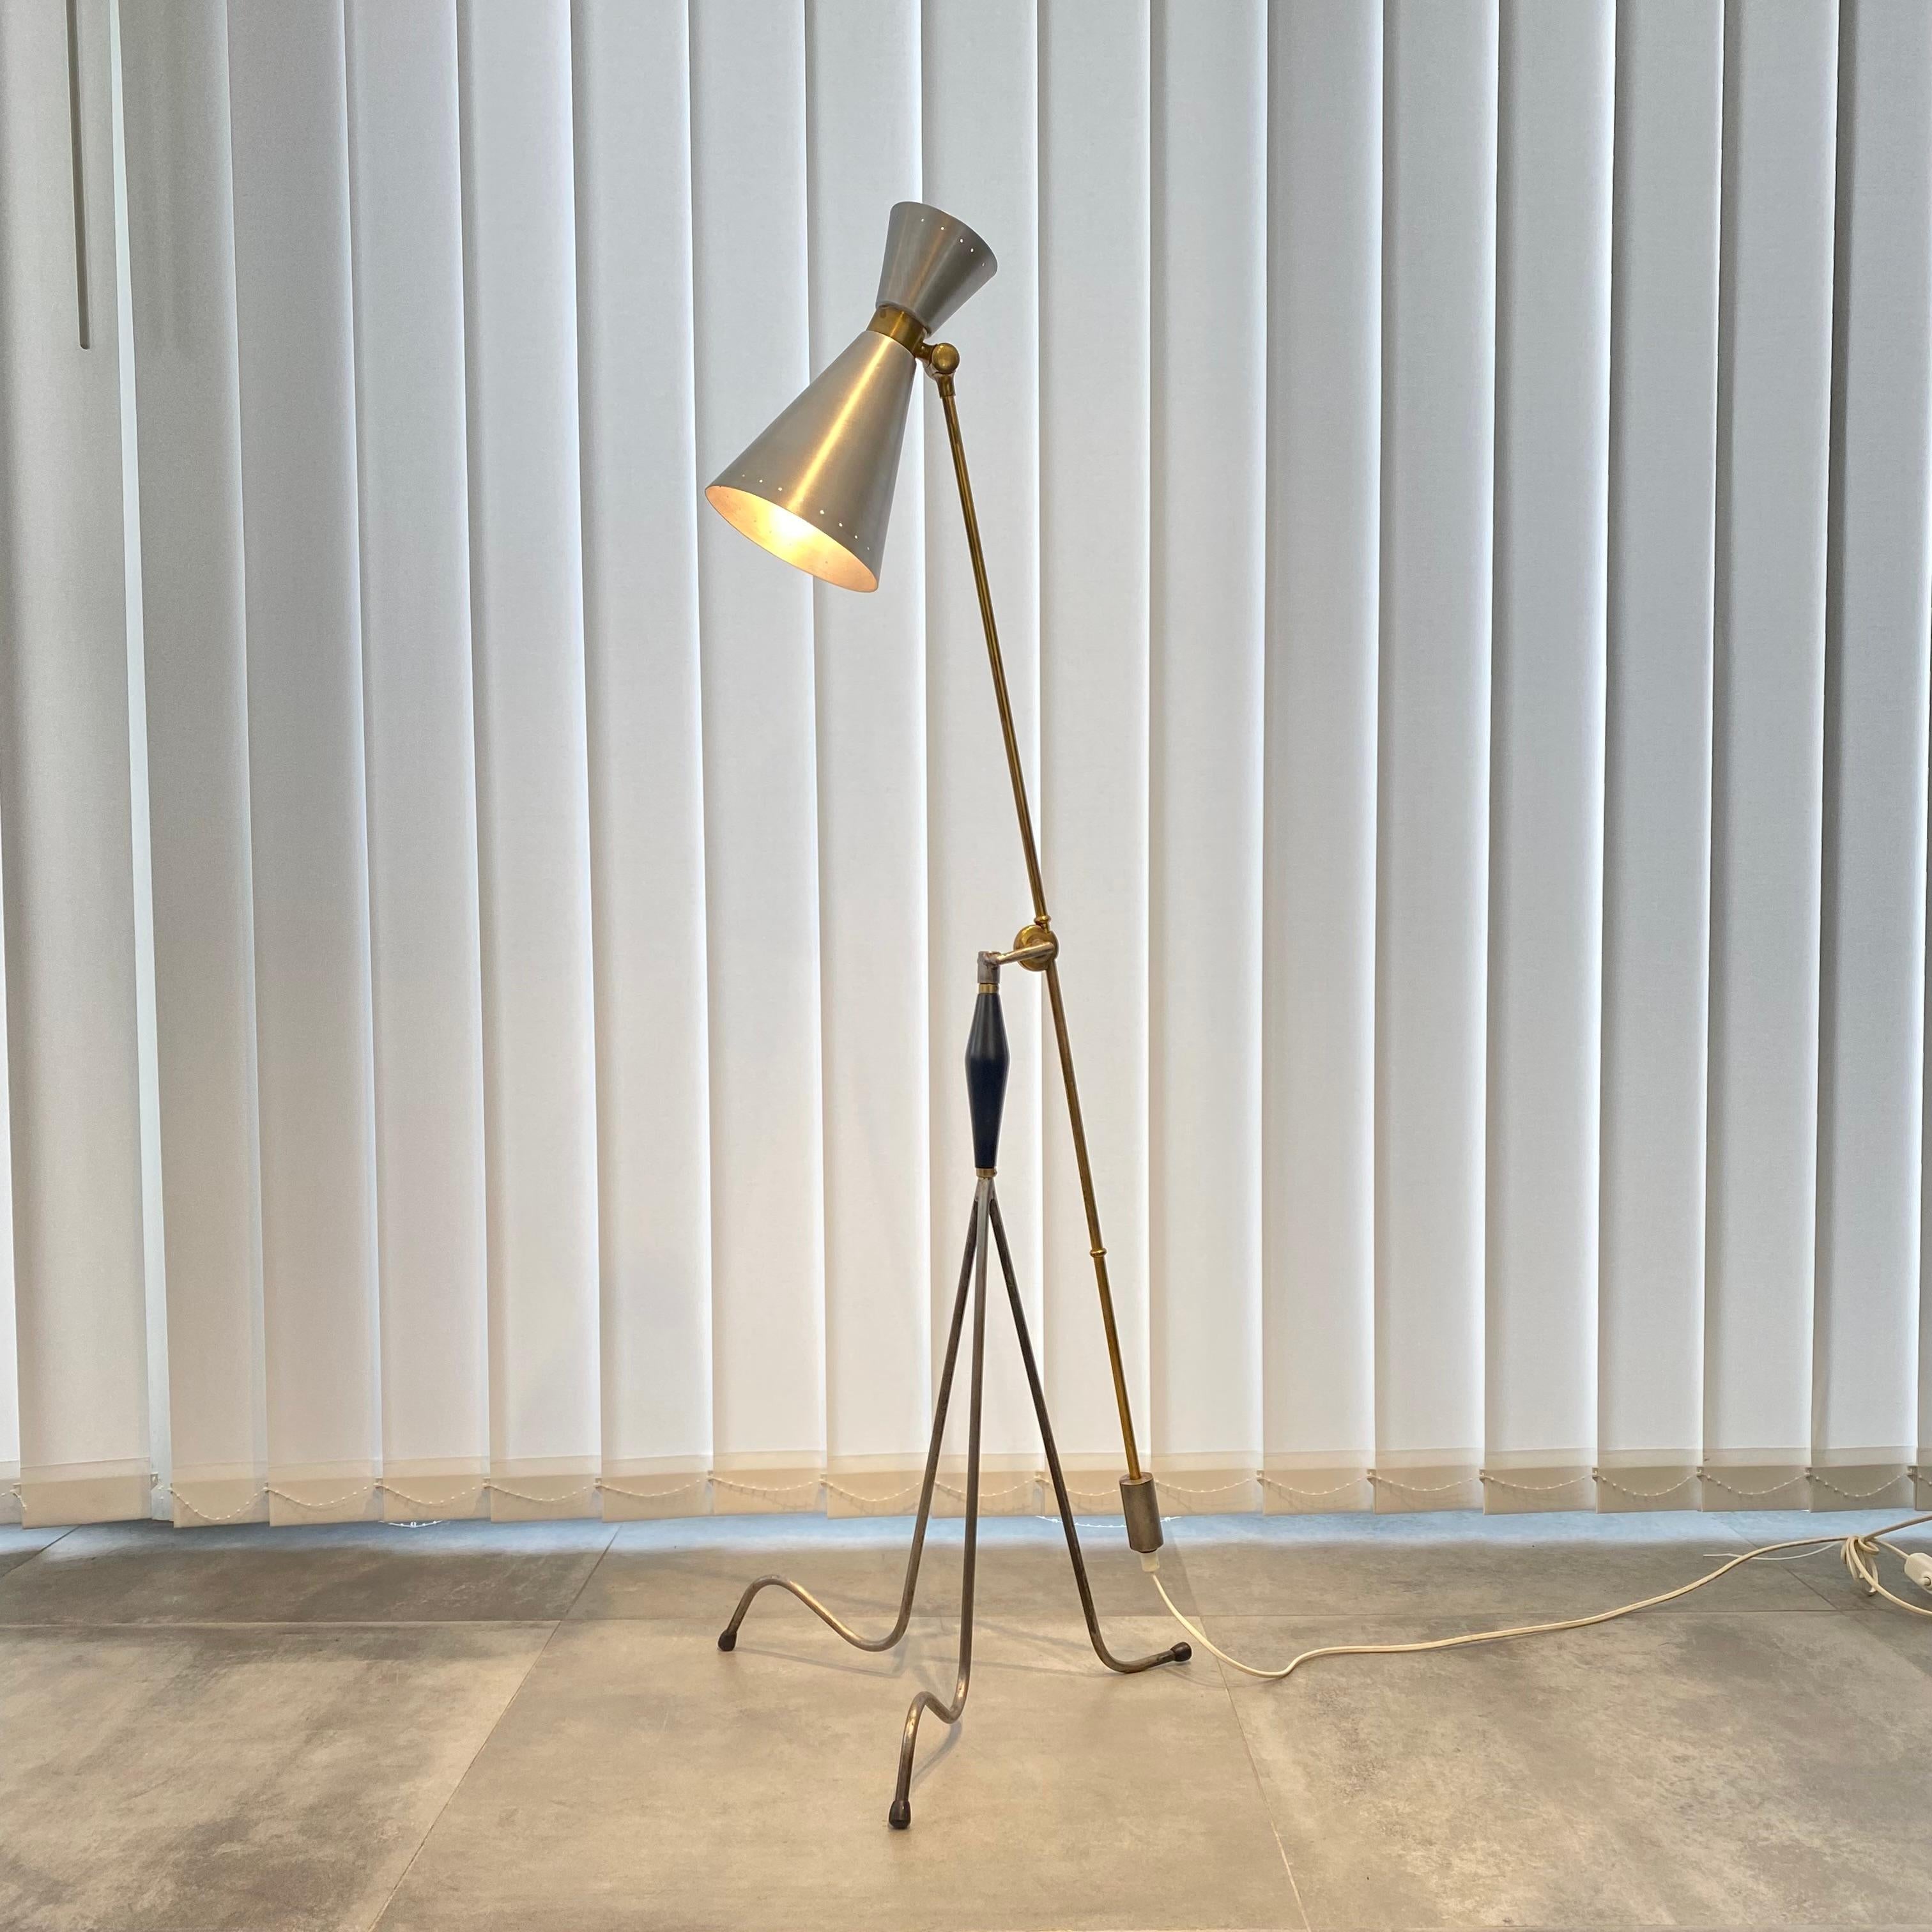 Rare Swedish 1950’s counterweight floor lamp, made from brass and steel. It stands on a tripod swivel base featuring a diamond-shaped wooden detail at the top. The brass arm is adjustable in all directions, and the double-cone lamp shade is also